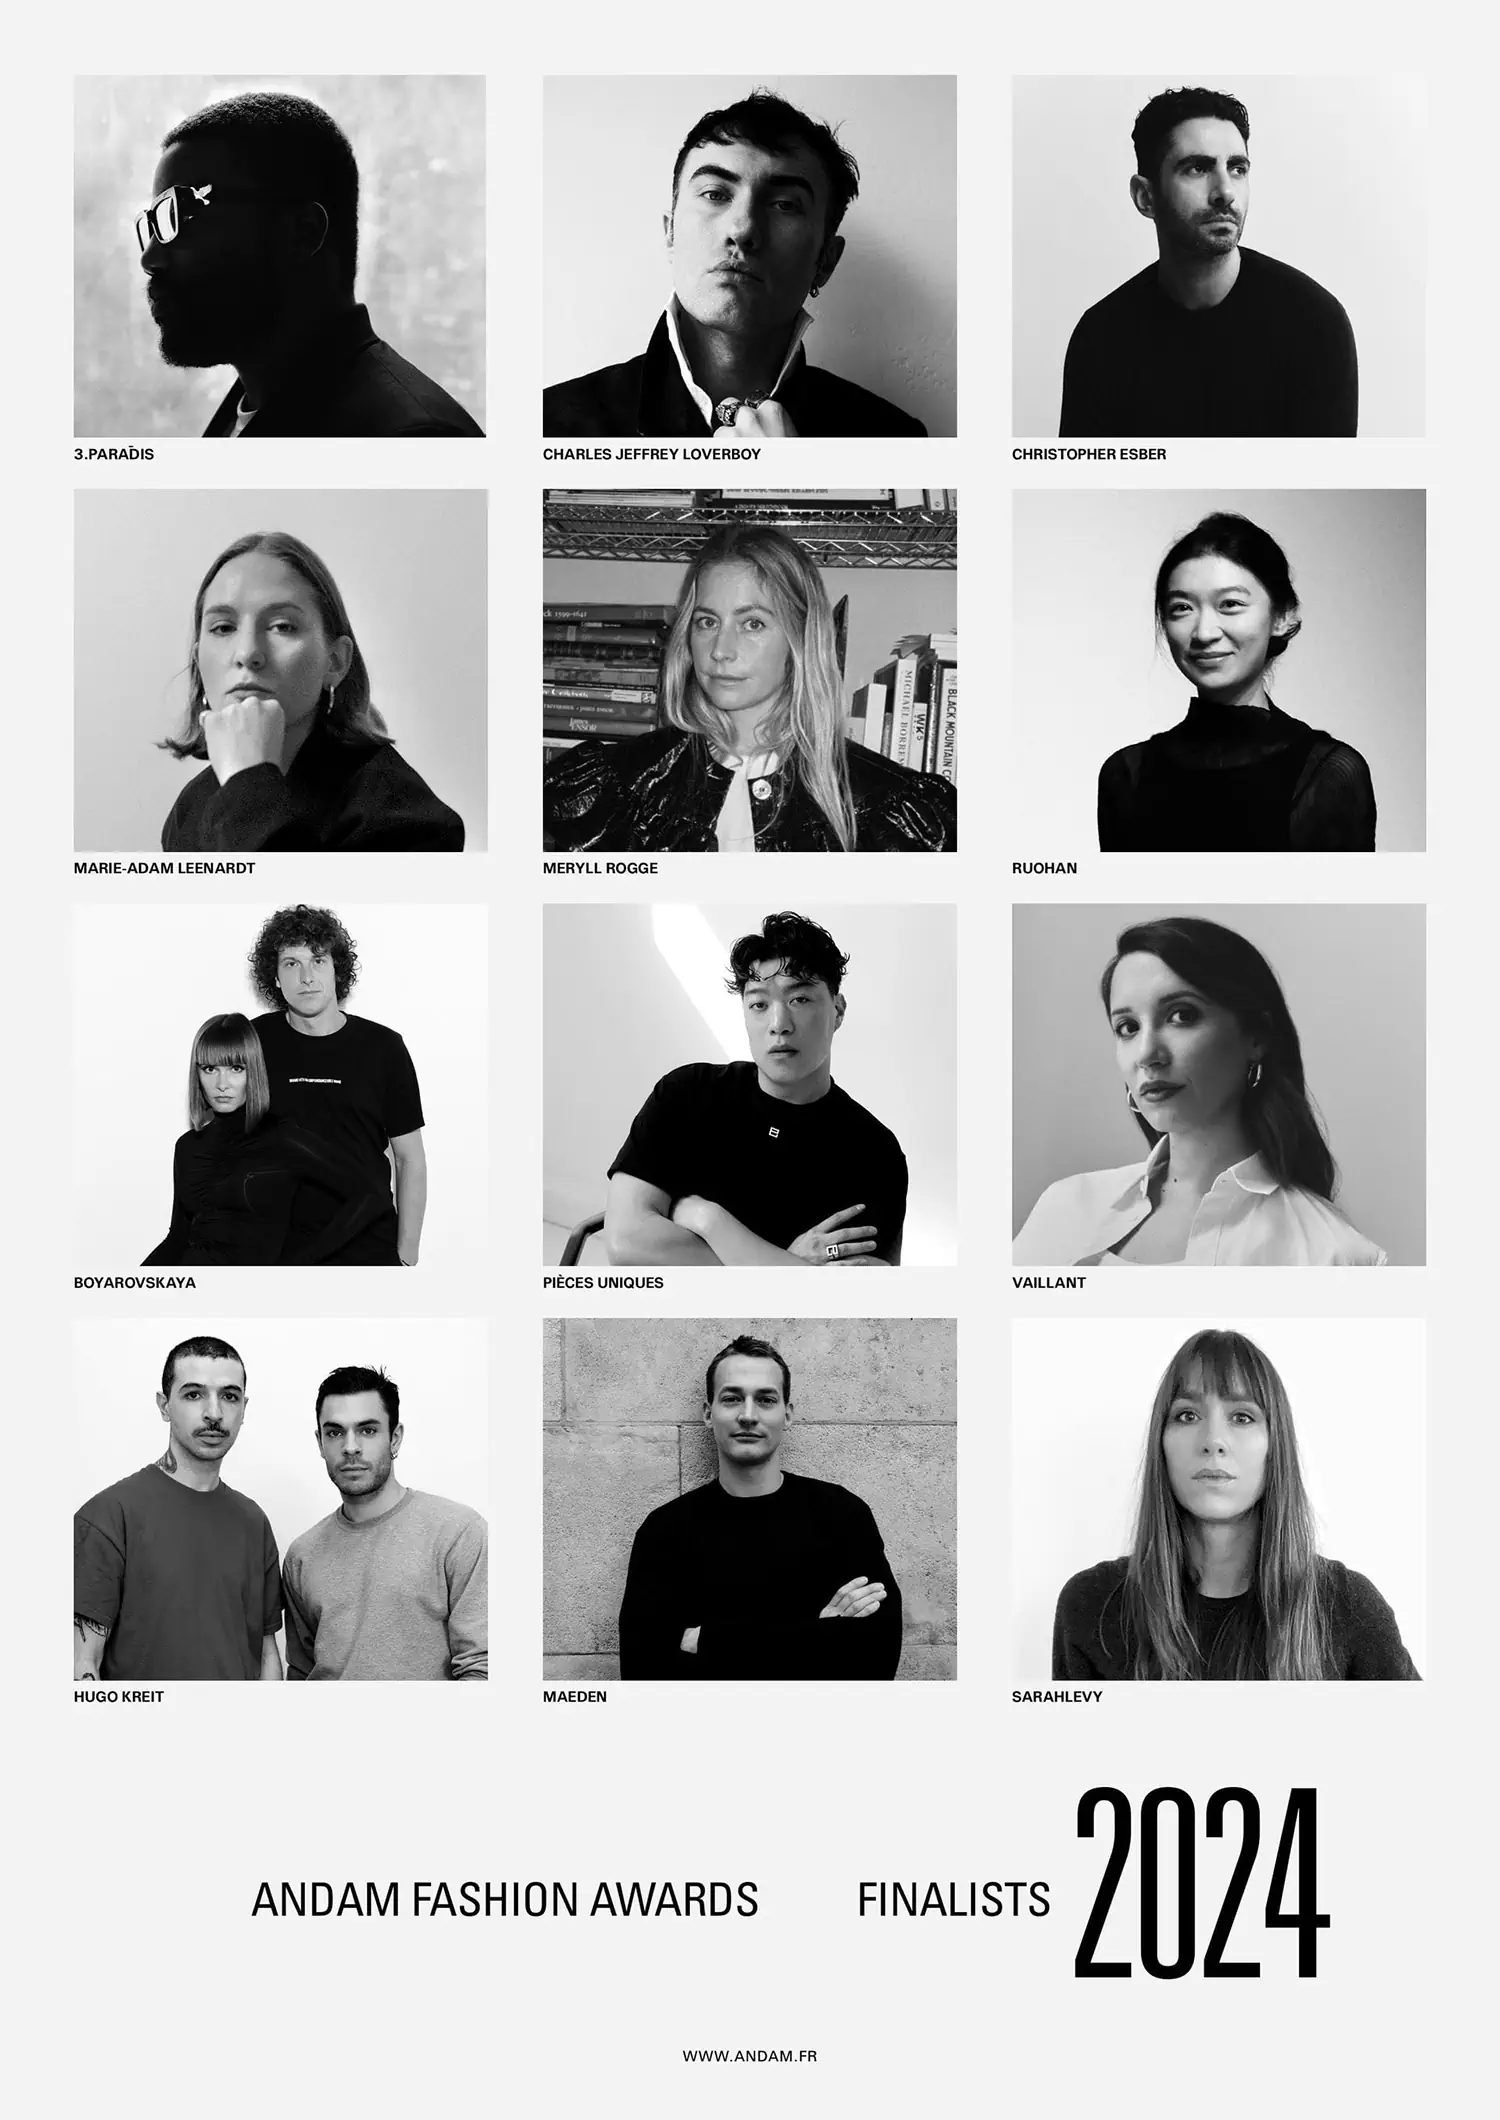 Andam 2024 announces 12 finalists for 35th anniversary edition